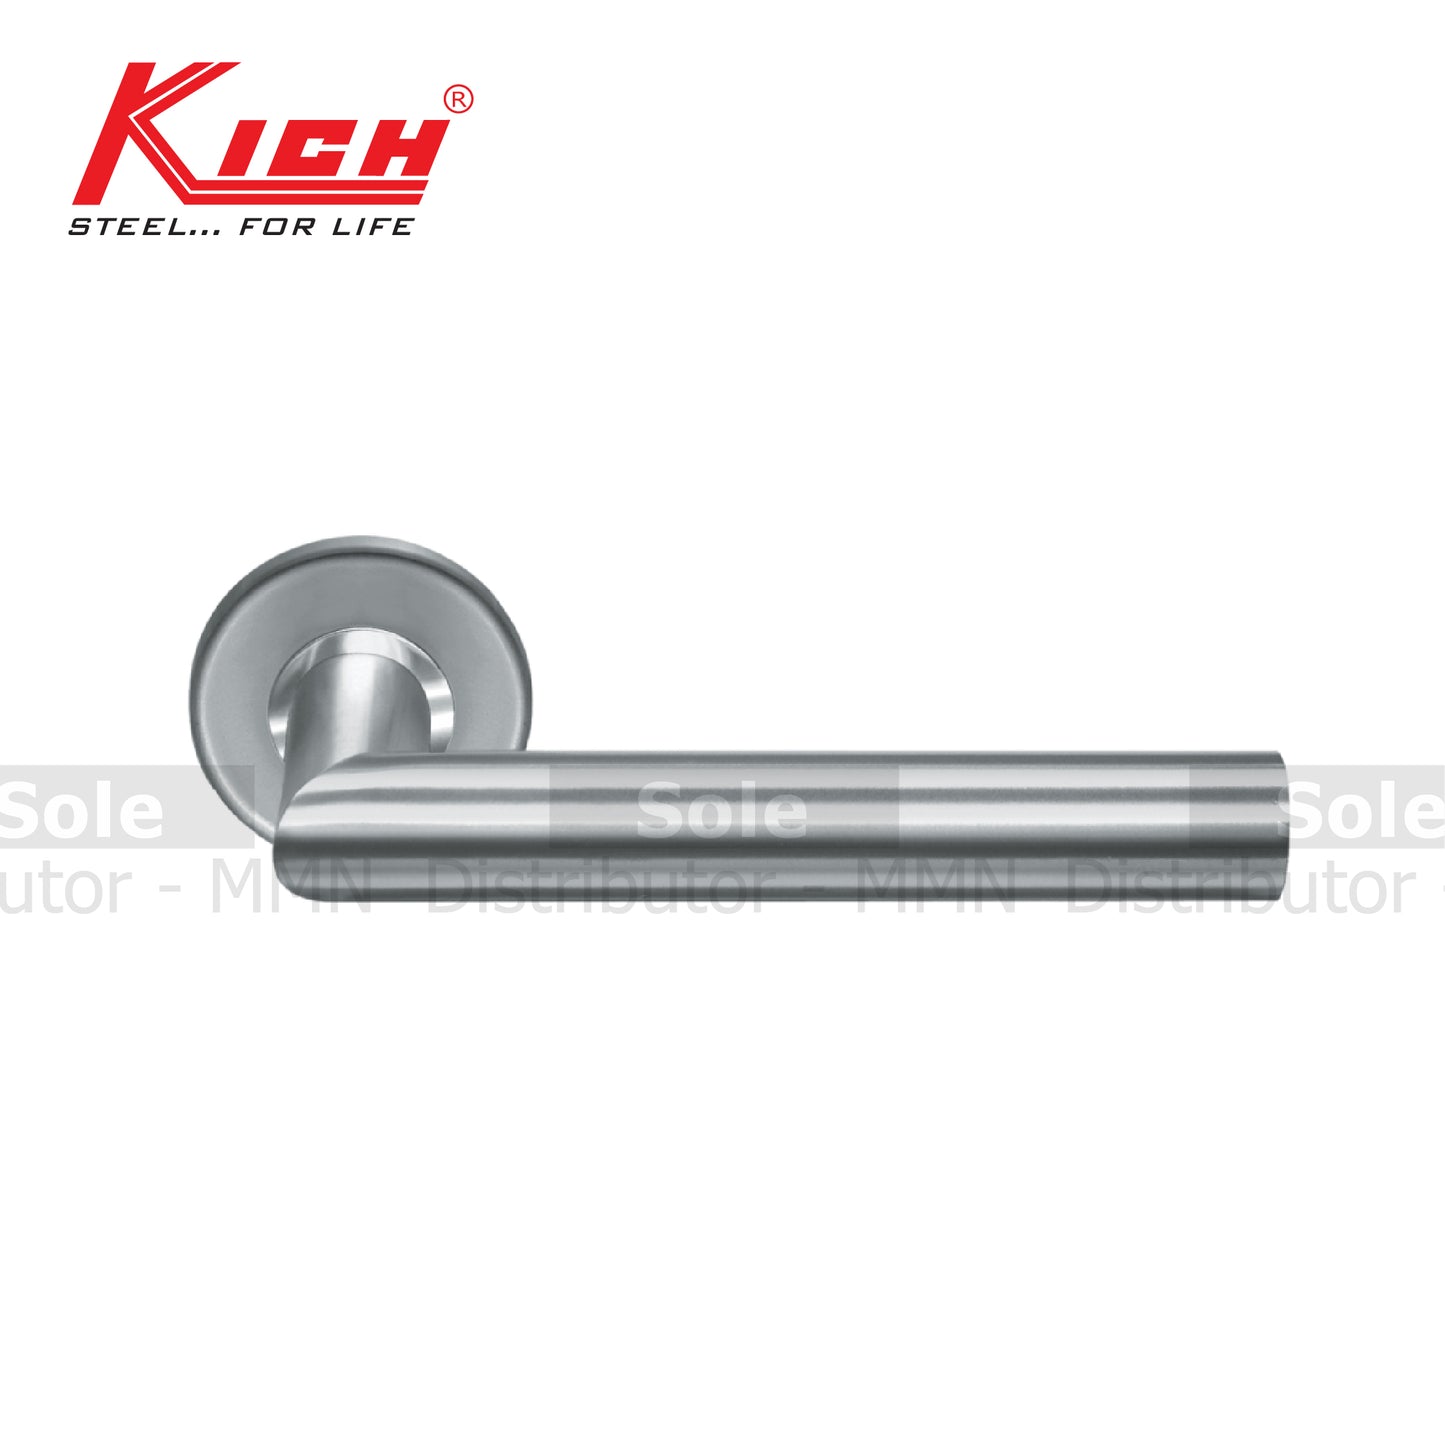 Kich Mortise Lever Handle Set With Escutcheons, Diameter 22mm, 316 Stainless Steel Finish- KPRMH2221S